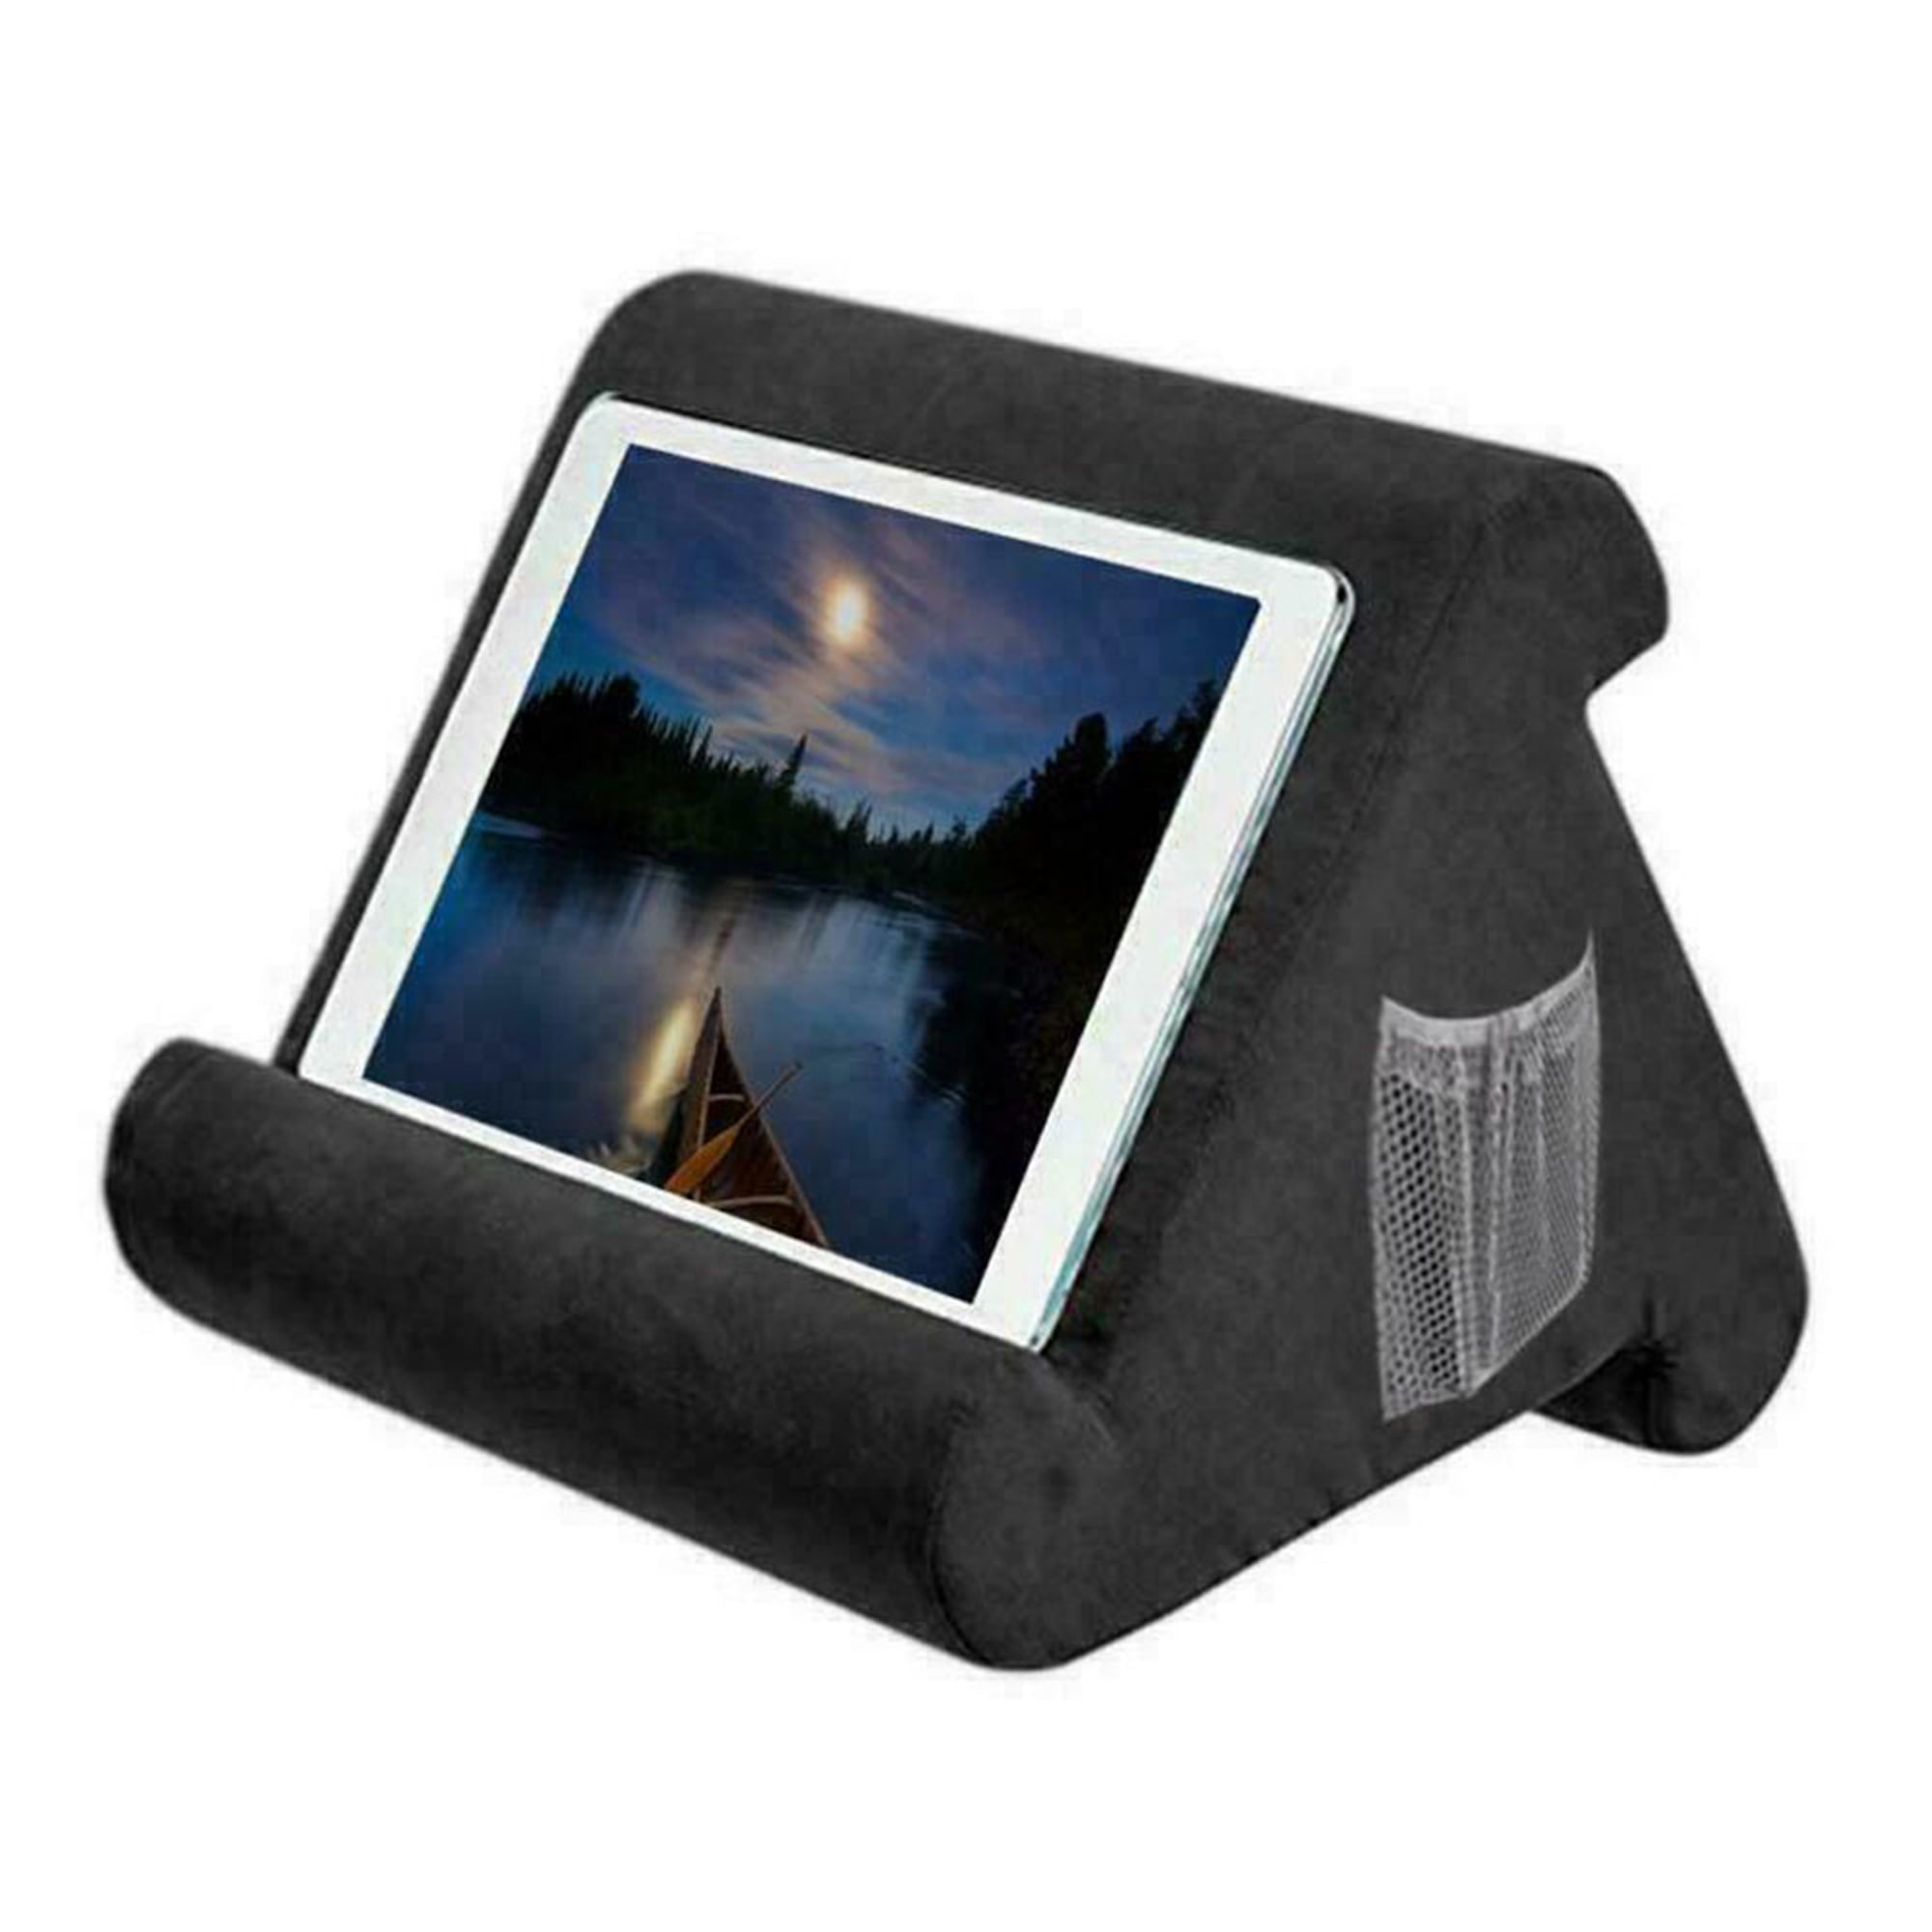 Desk Sofa Used On Bed Foldable Tablet Soft Pillow Lap Holder Stand Book Rest Reading Support Cushion For iPad Foldable Triangular Floor Multi-Angle Soft Pillow Wine Red Lap Car Couch